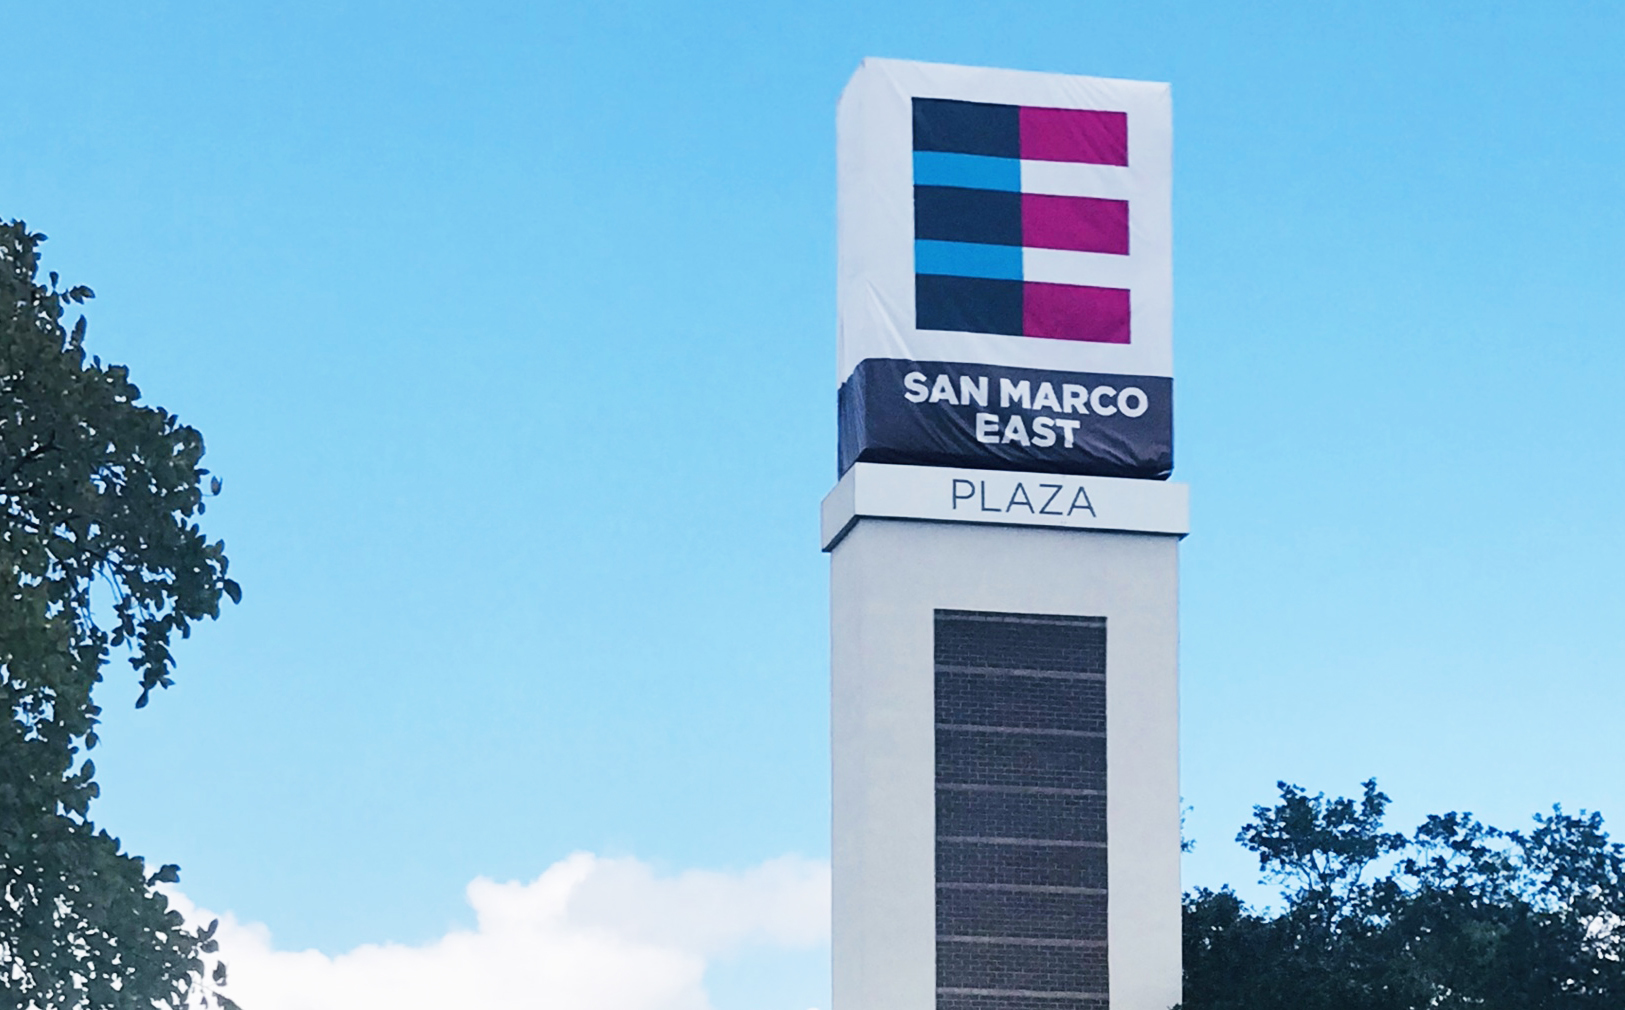 San Marco East Plaza is the rebranded Metro Square office park along Philips Highway.